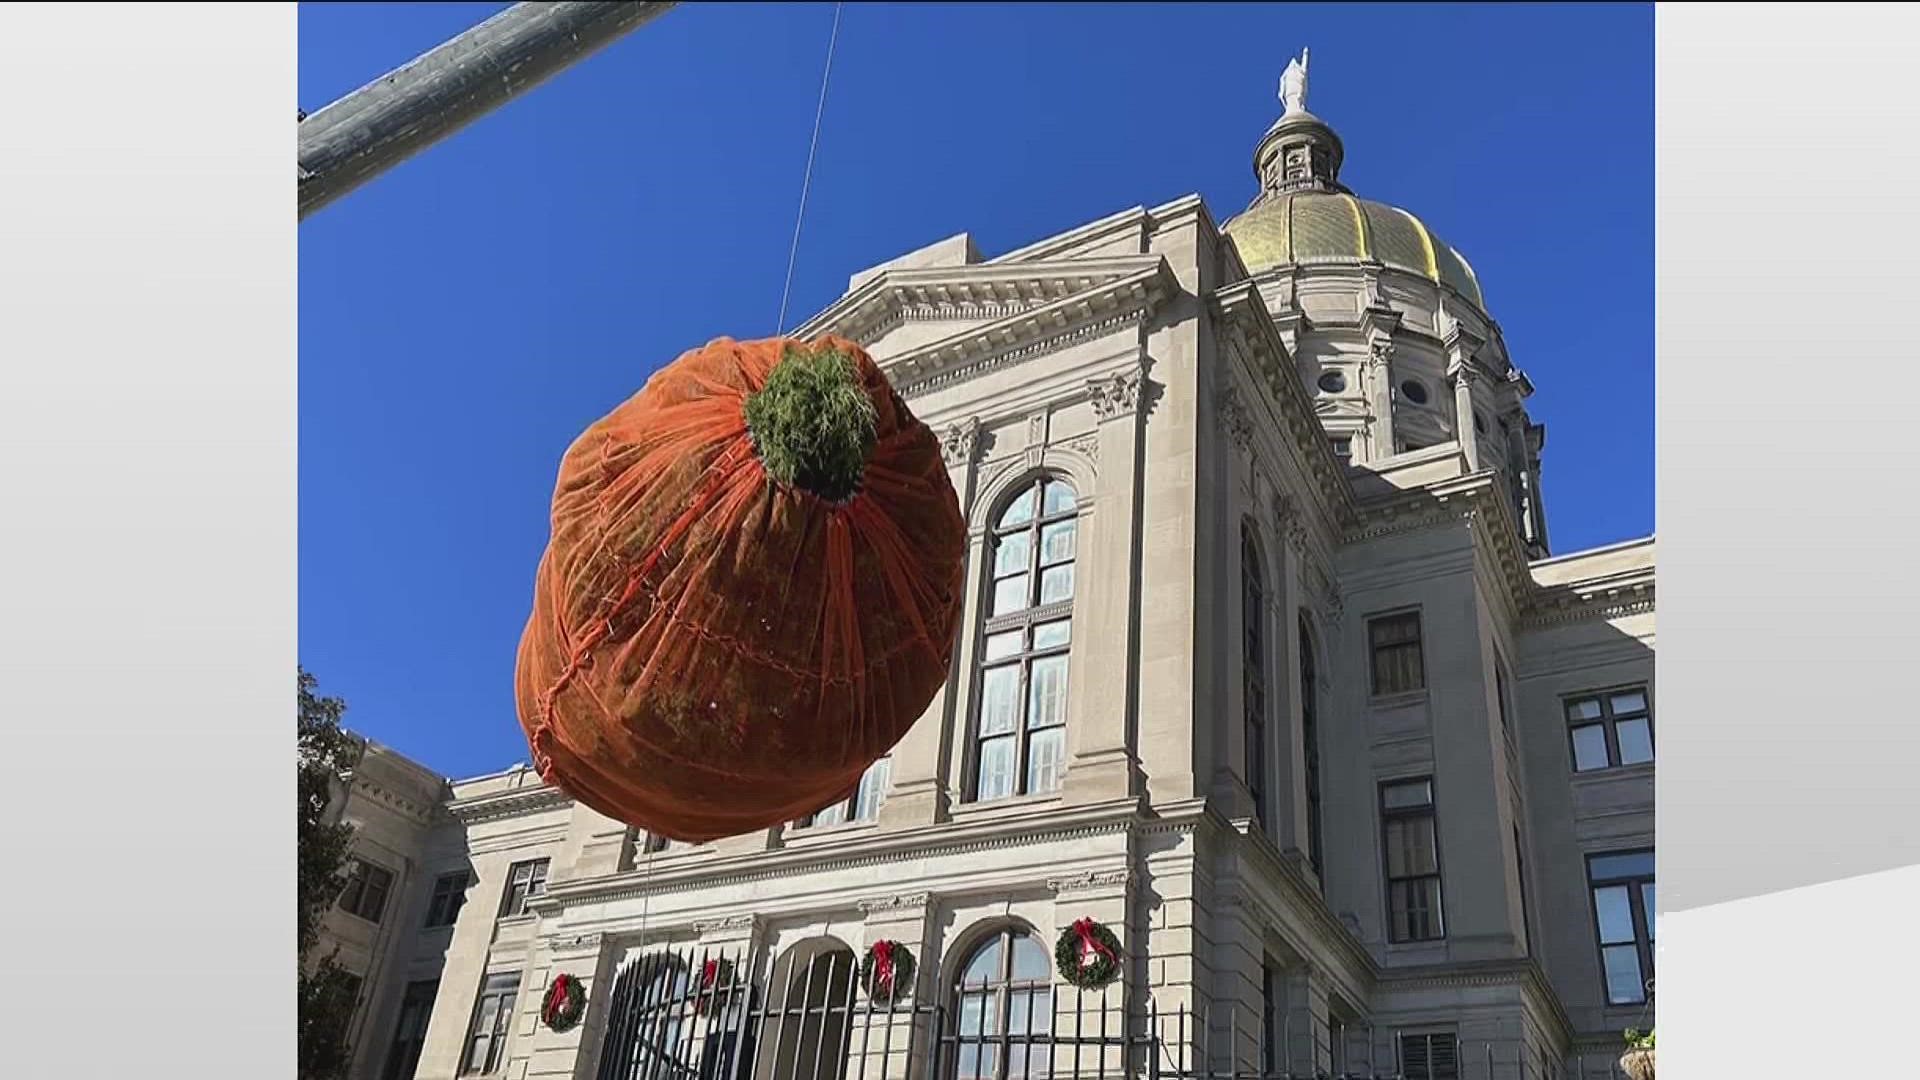 The Georgia Forestry Commission helped find, prepare and transport the tree to the Capitol.